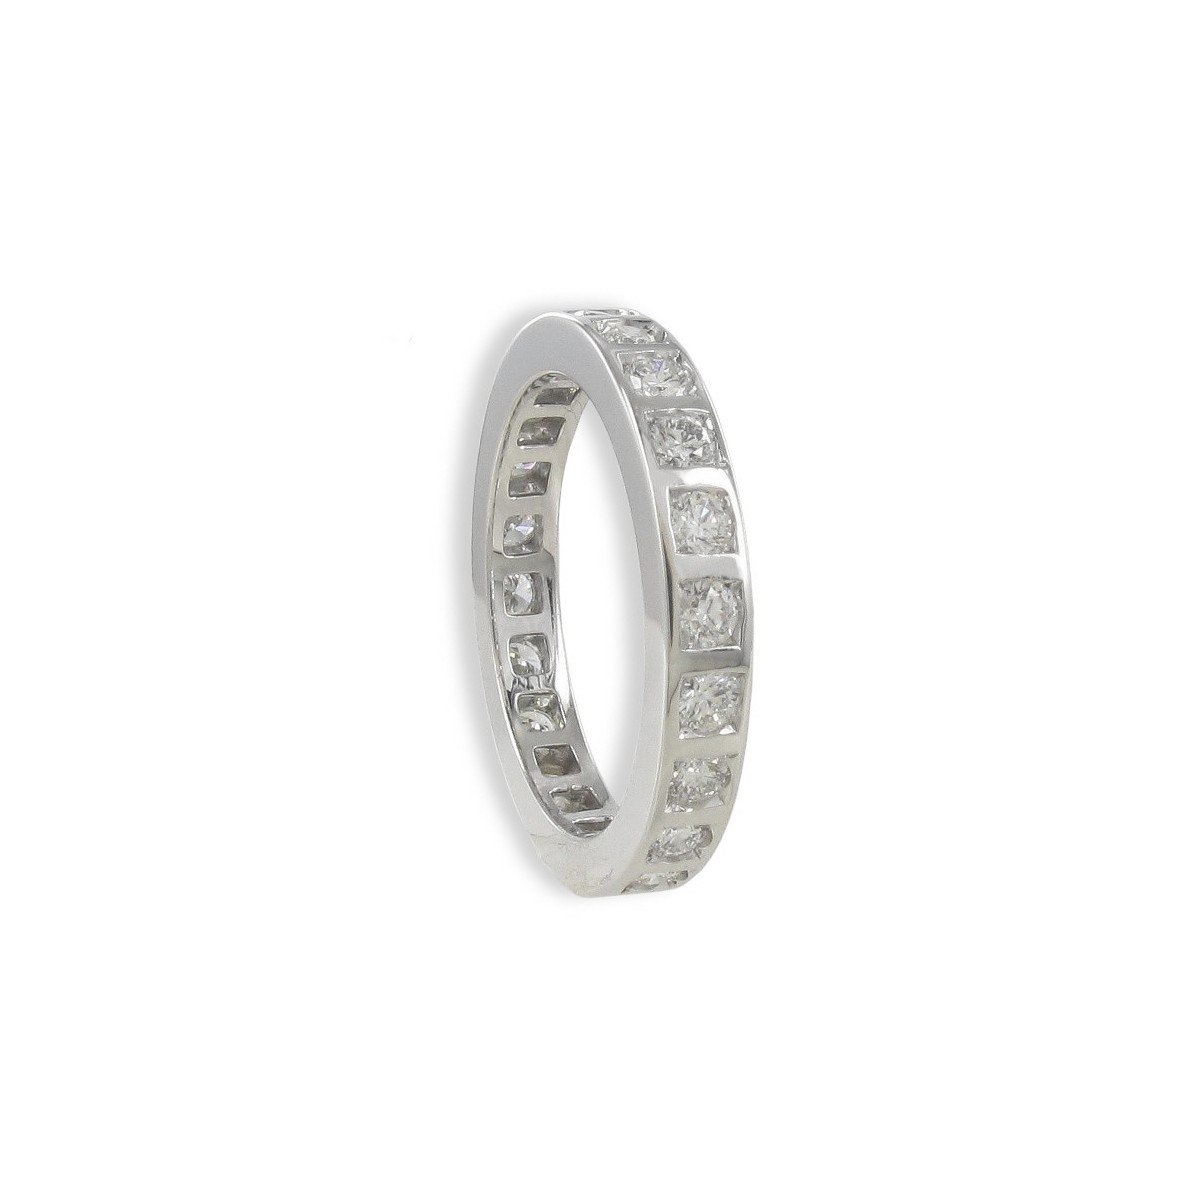 WHITE GOLD RING WITH 22 DIAMONDS